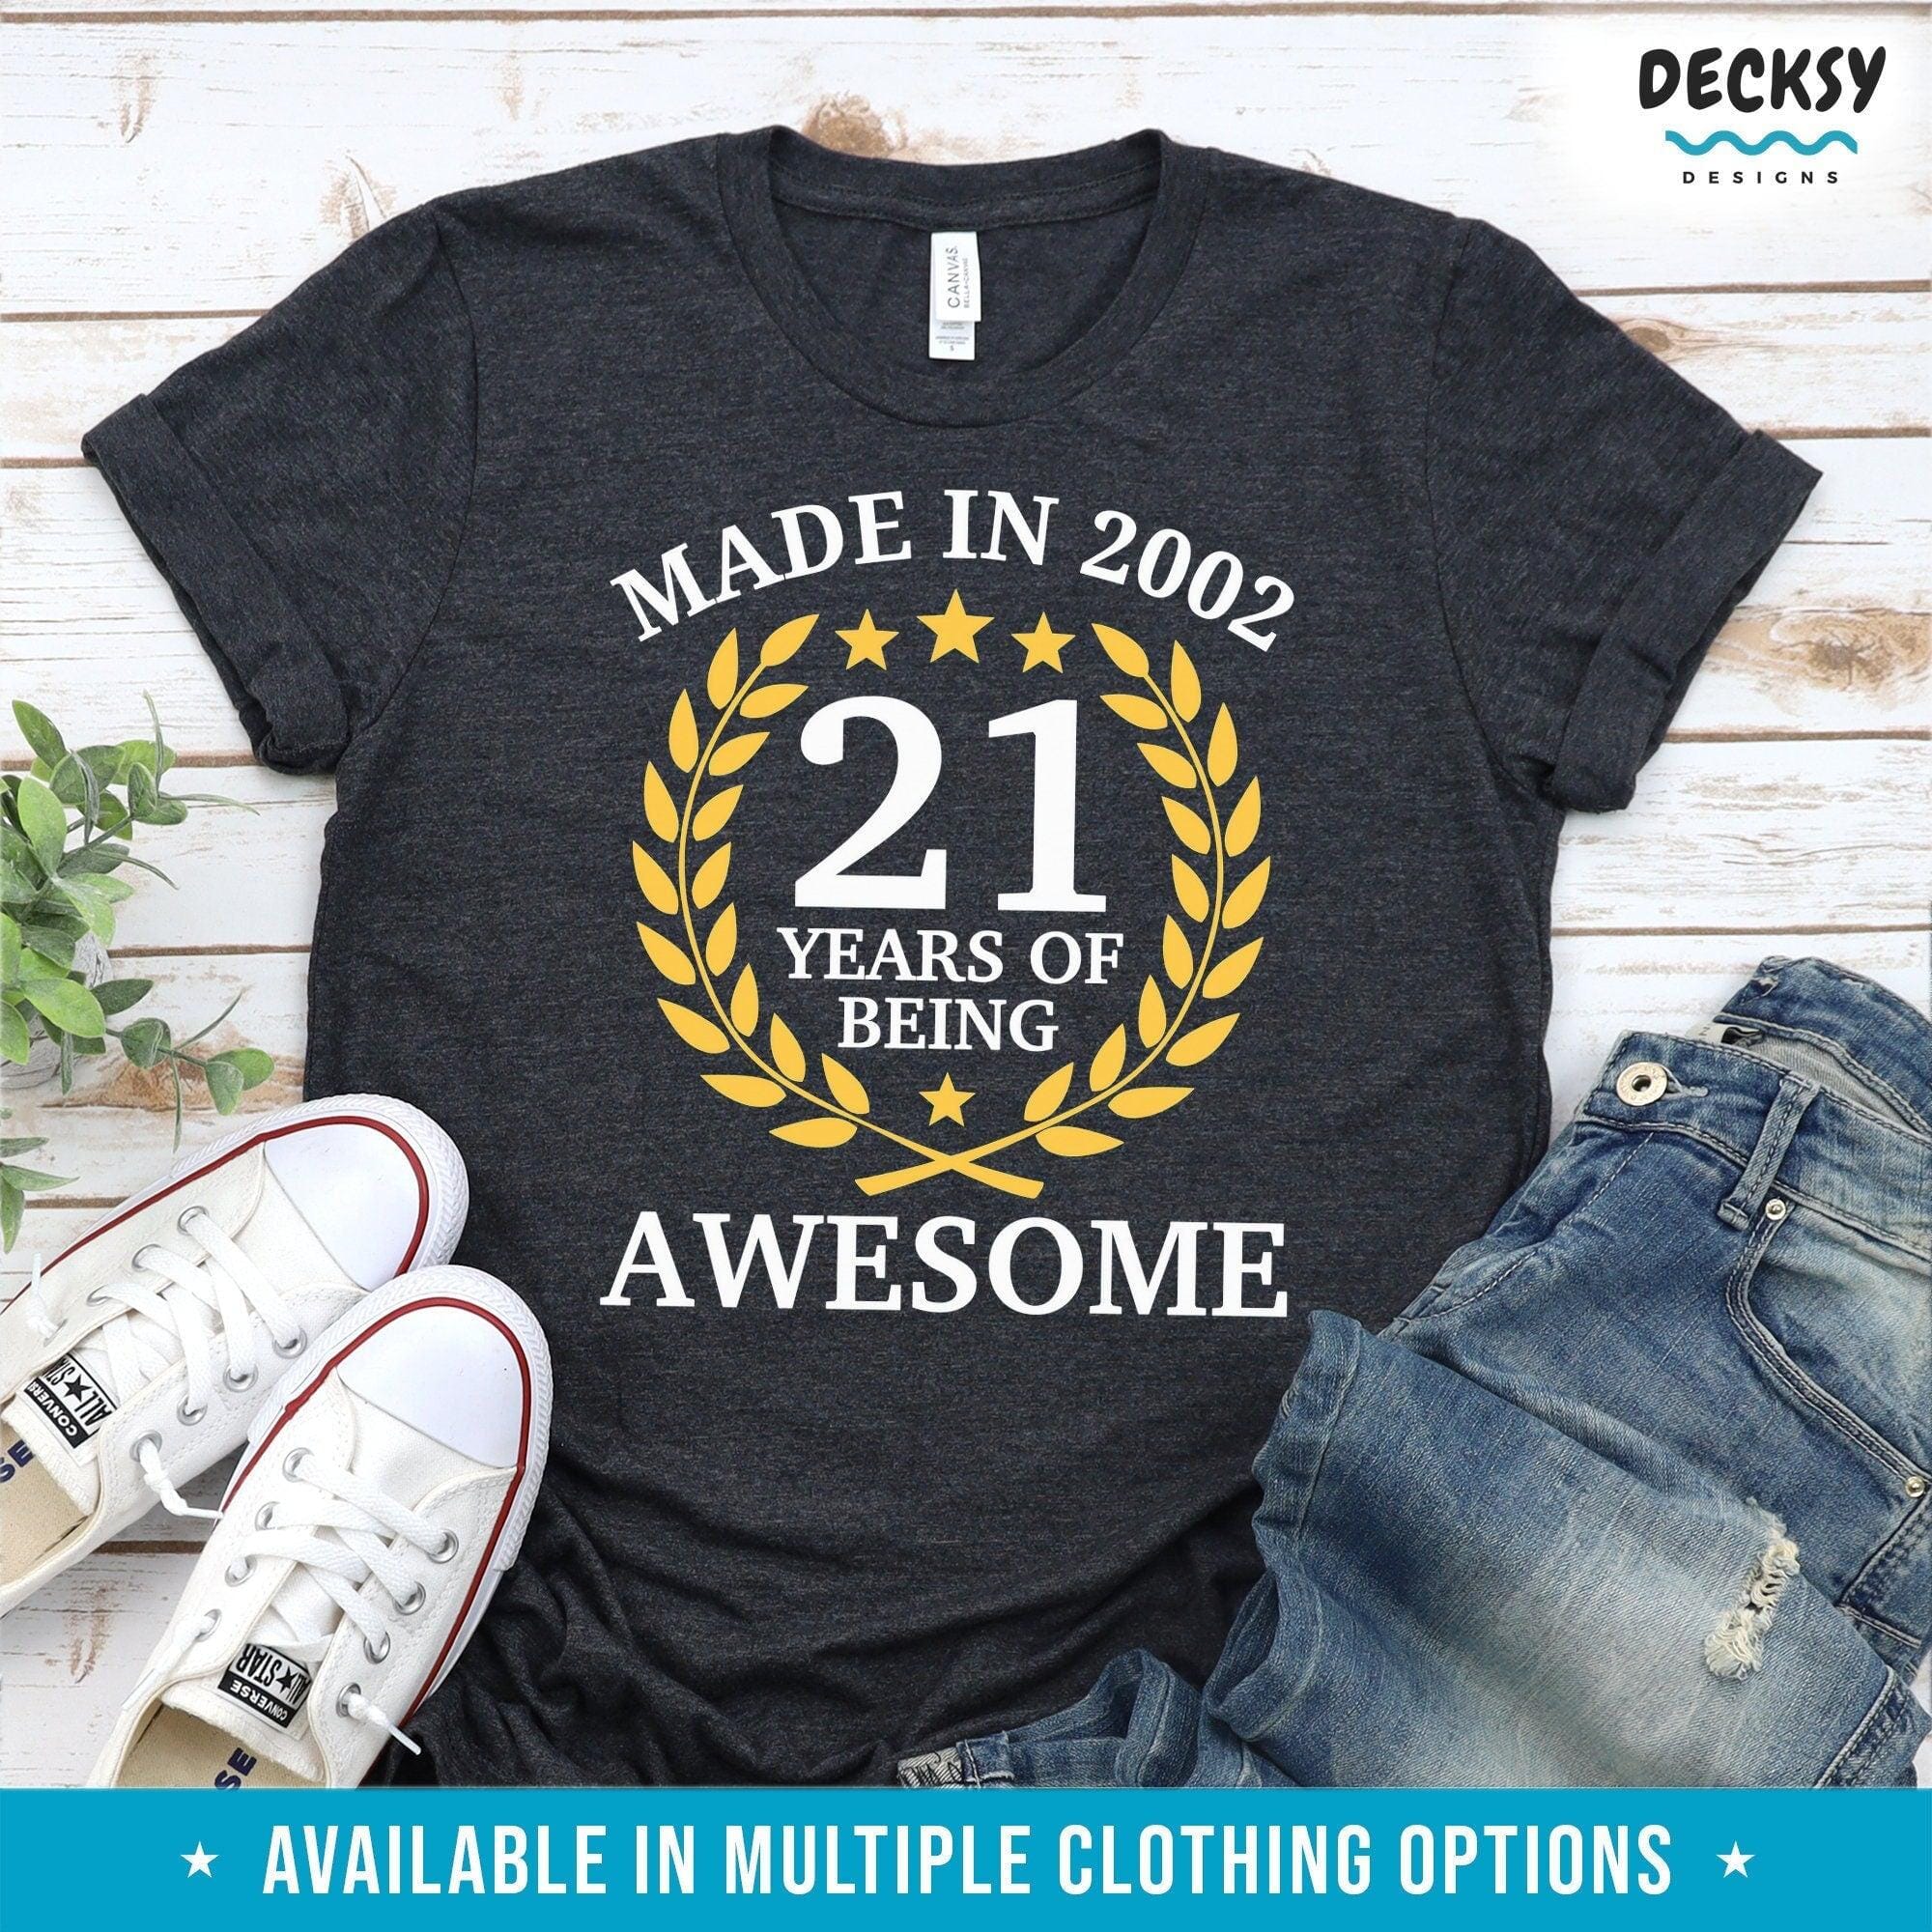 Born in 2002 Shirt, Personalised 21st Birthday Gift-Clothing:Gender-Neutral Adult Clothing:Tops & Tees:T-shirts:Graphic Tees-DecksyDesigns